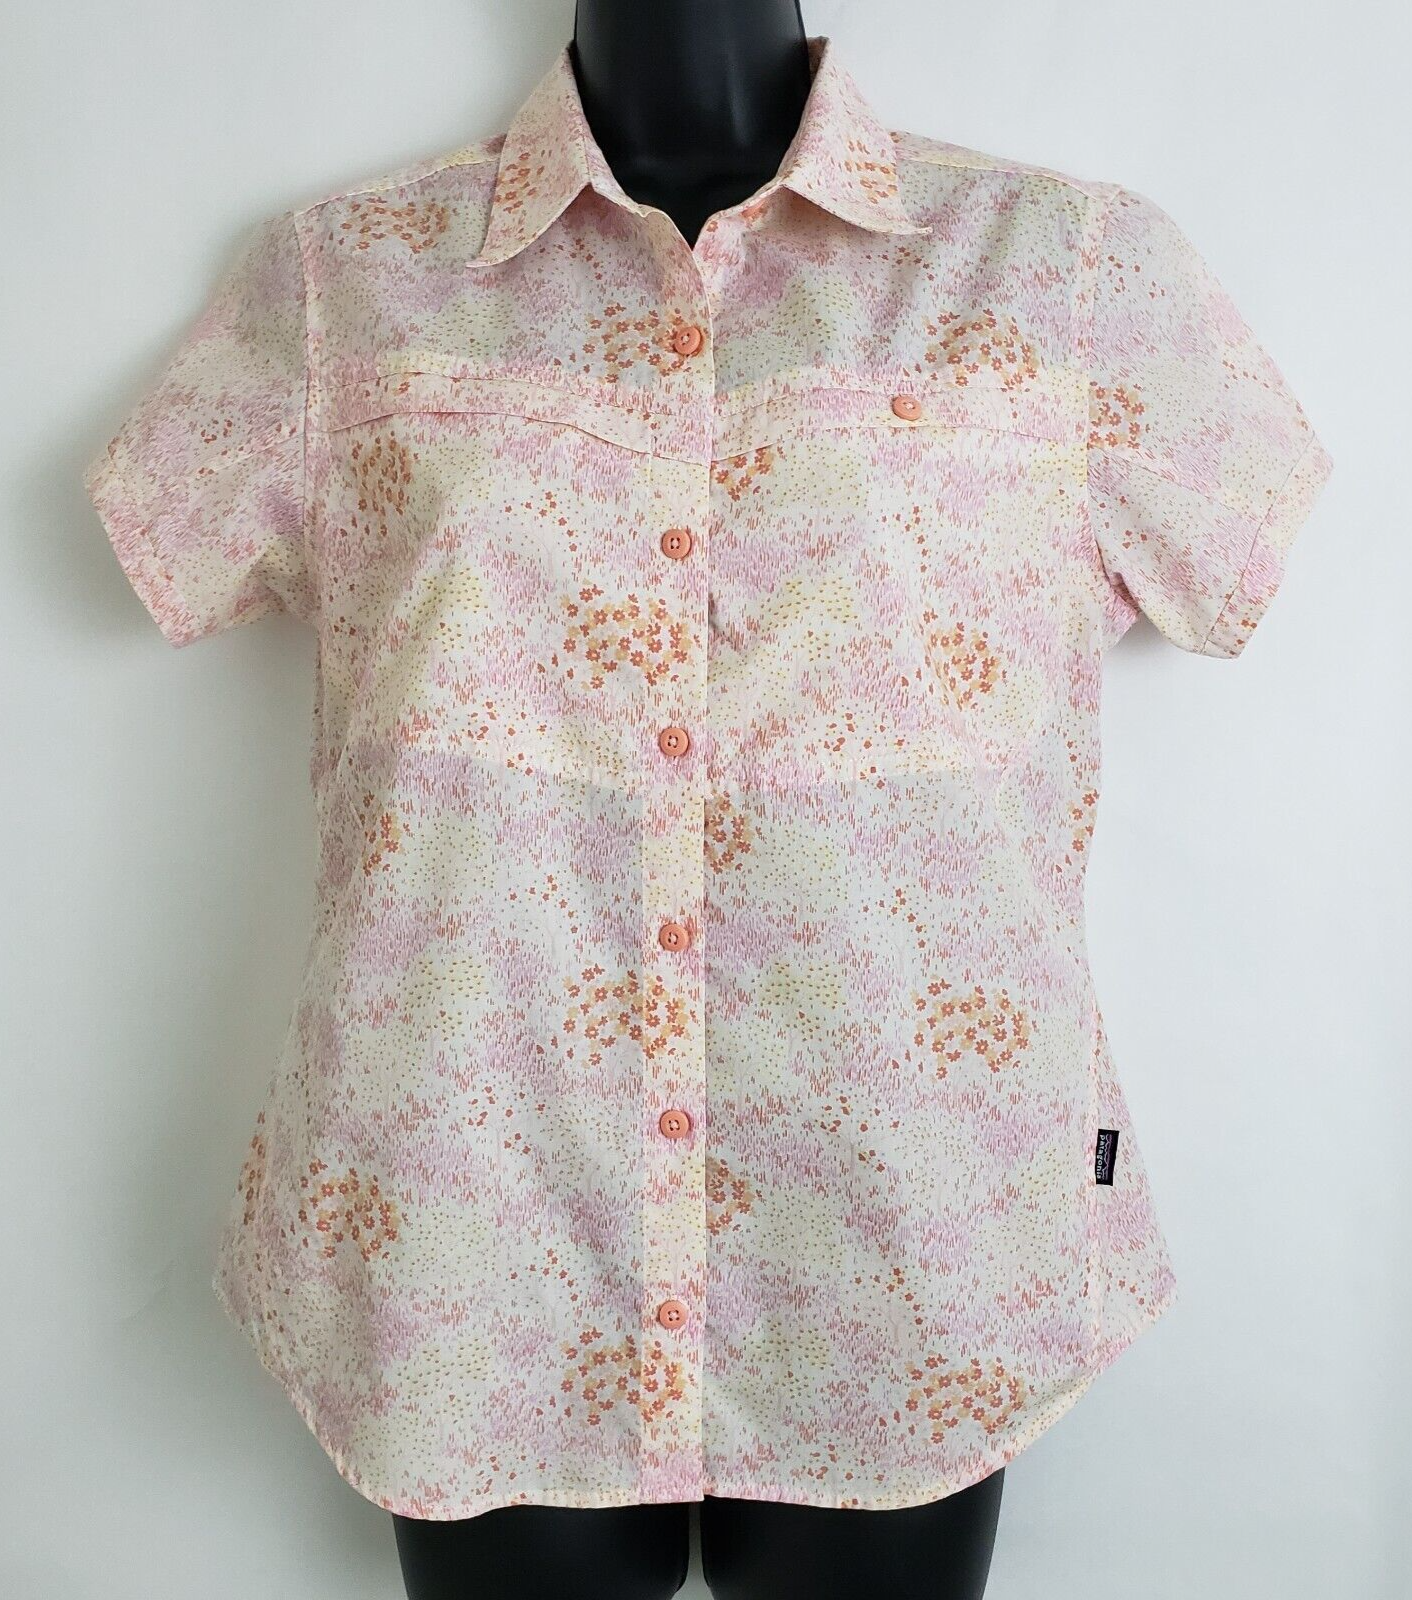 Primary image for Patagonia Women's Blouse Short Sleeve Floral Peach Multi-Color Size 6